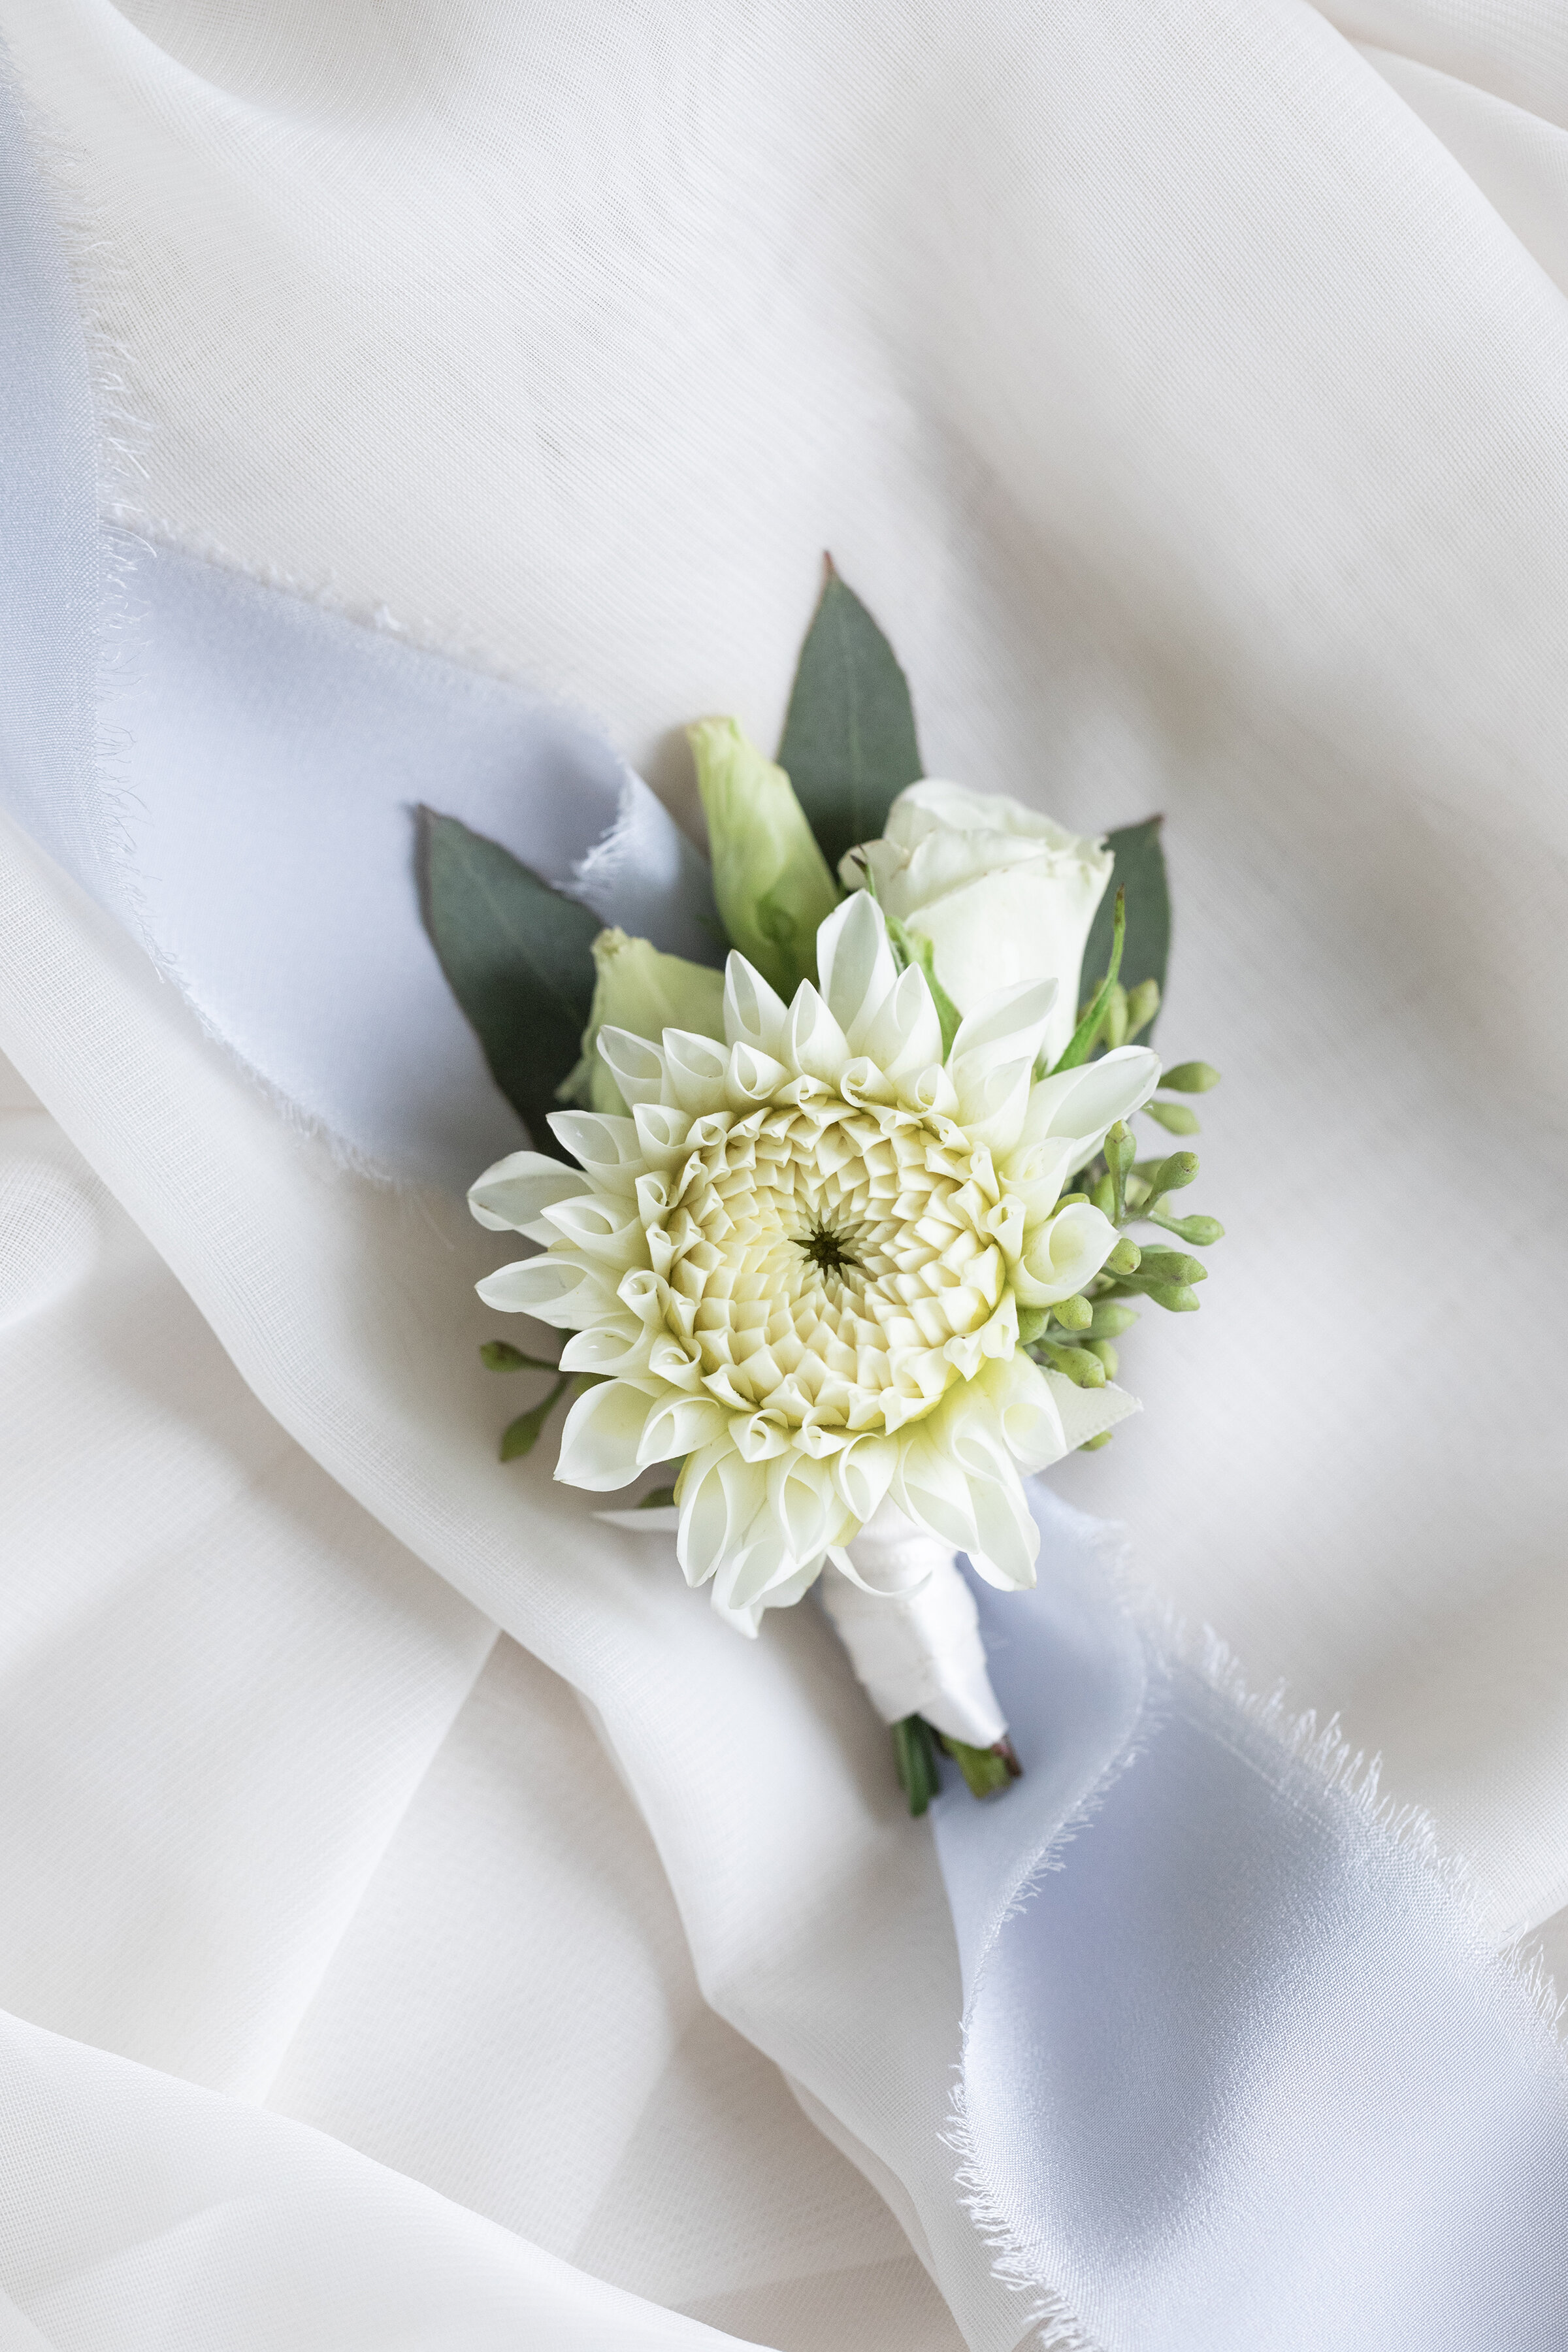  Pressed against a soft chiffon background, Clarity Lane Photography captures wedding day details including this white boutonnière. white daisy boutonniere, white wedding flowers, wedding flower flatlay photo, white chiffon flatlay background, profes